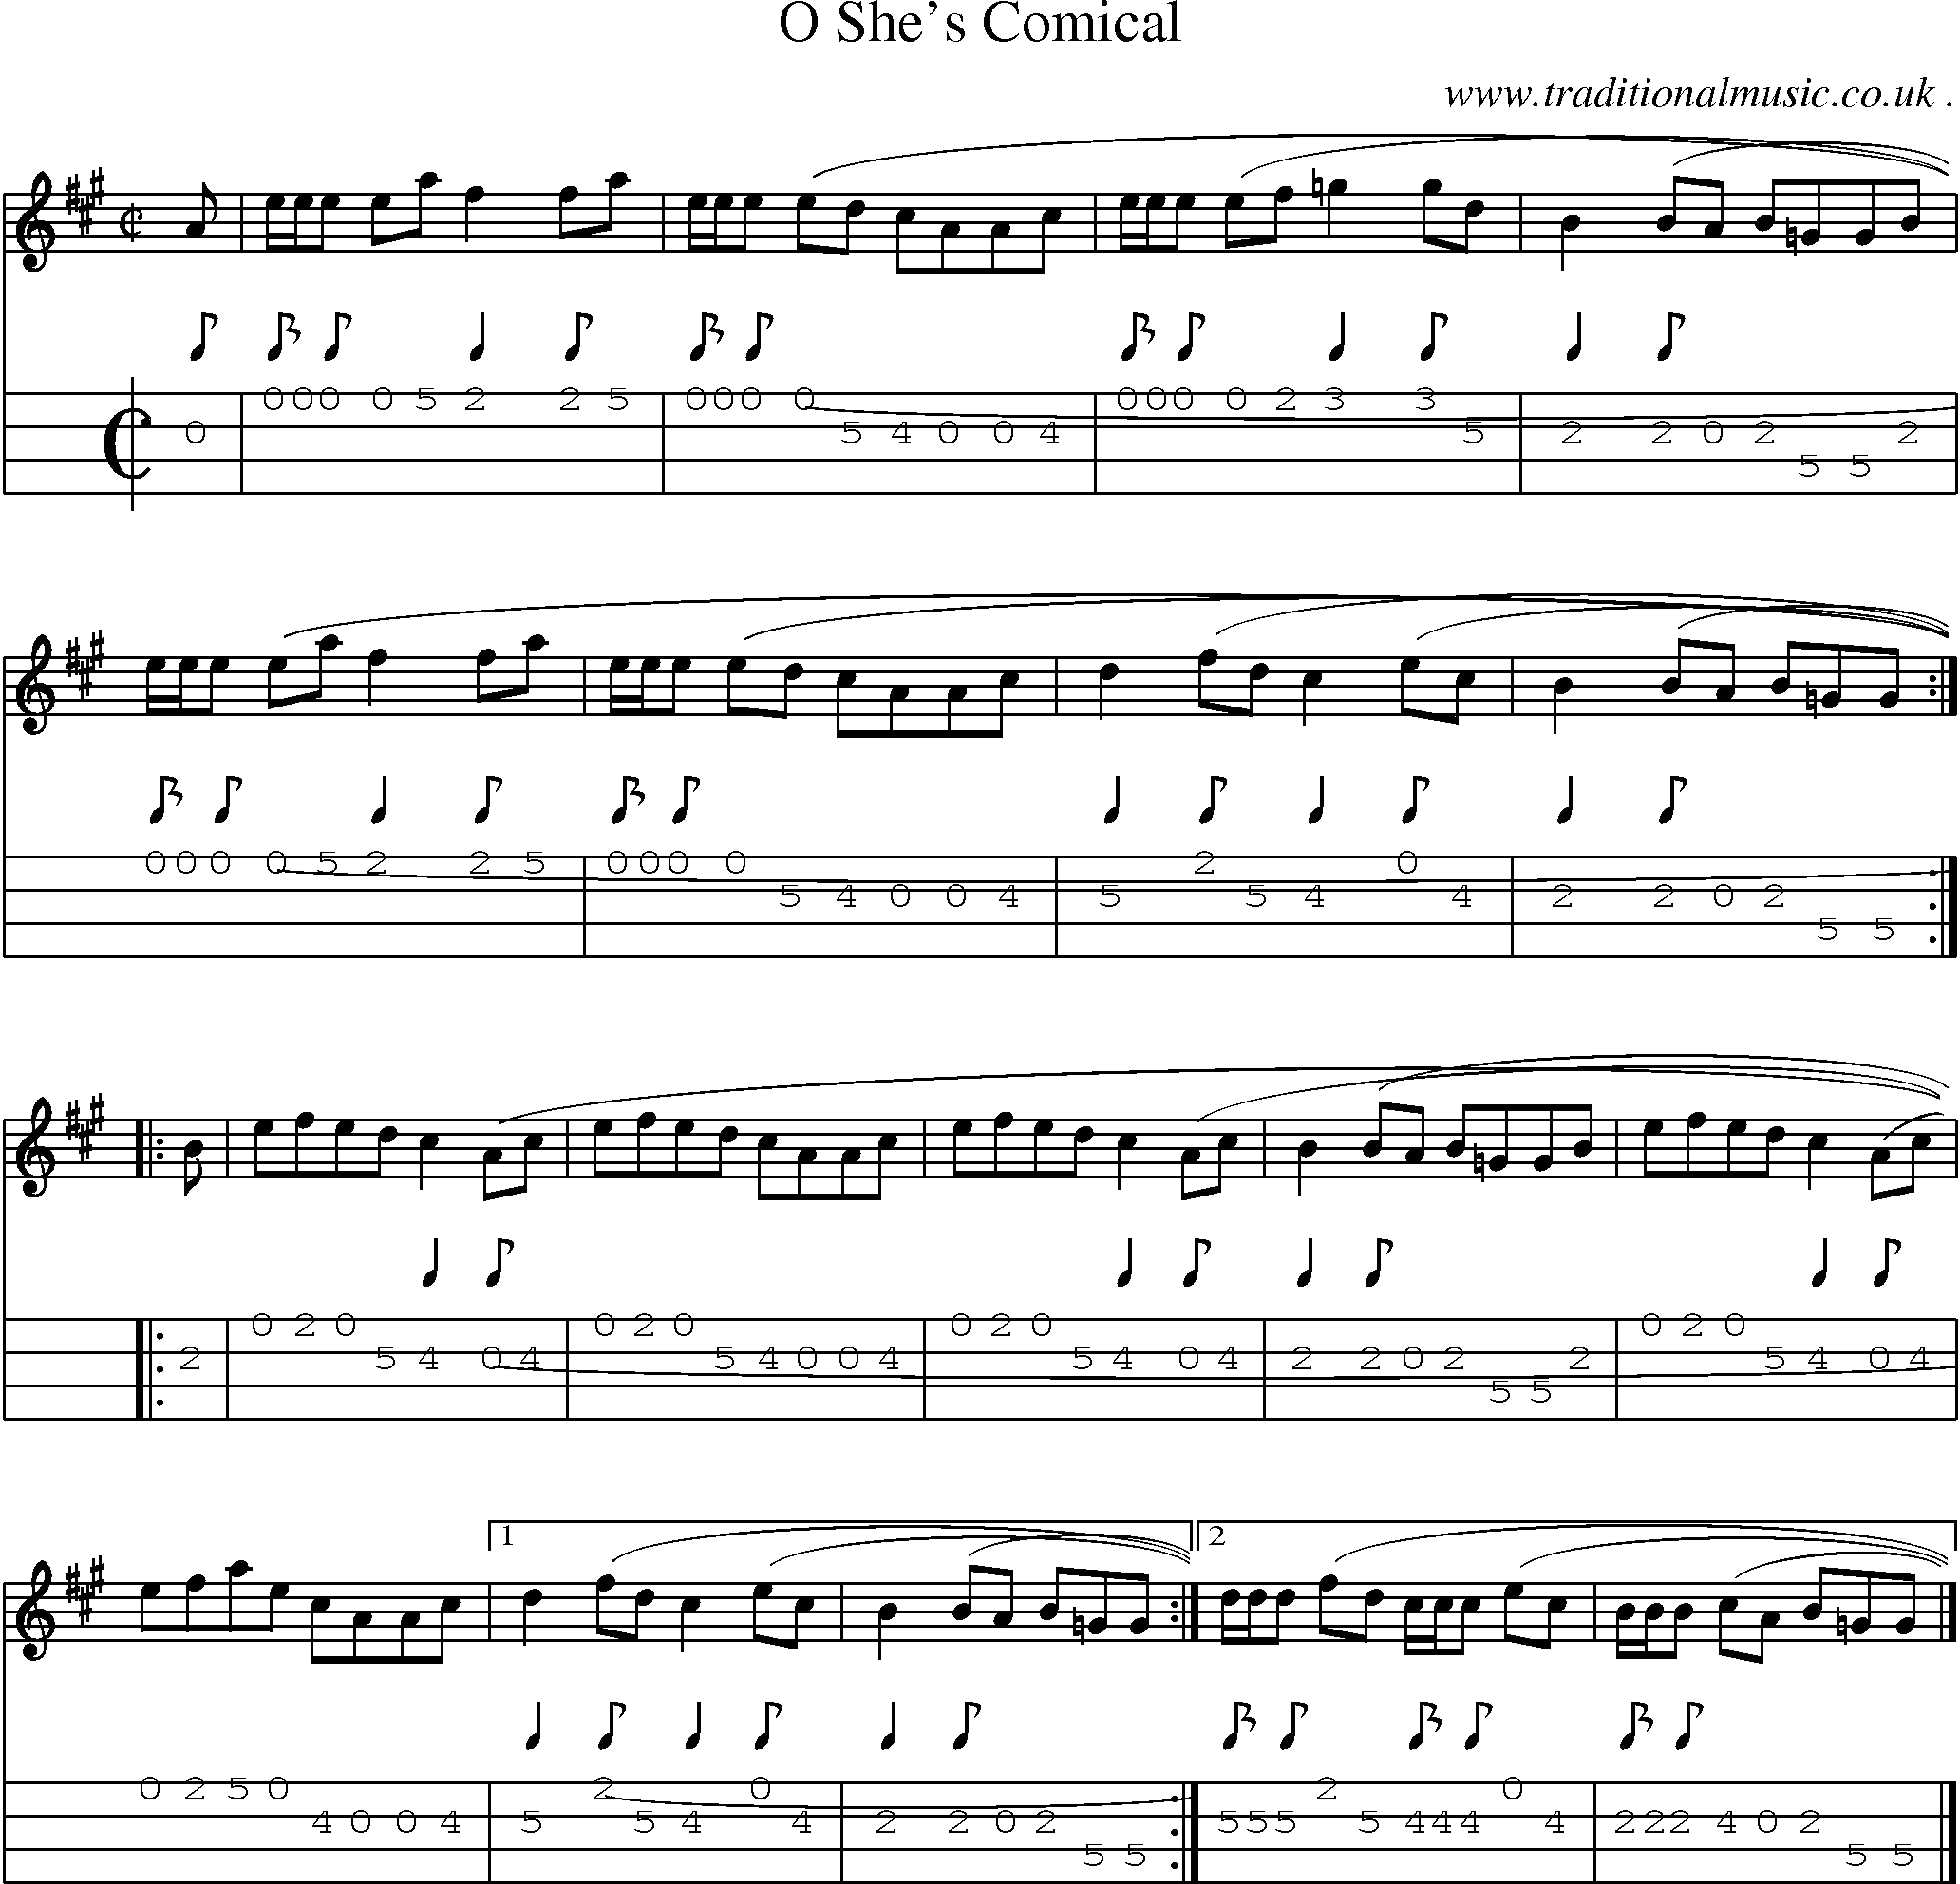 Sheet-music  score, Chords and Mandolin Tabs for O Shes Comical